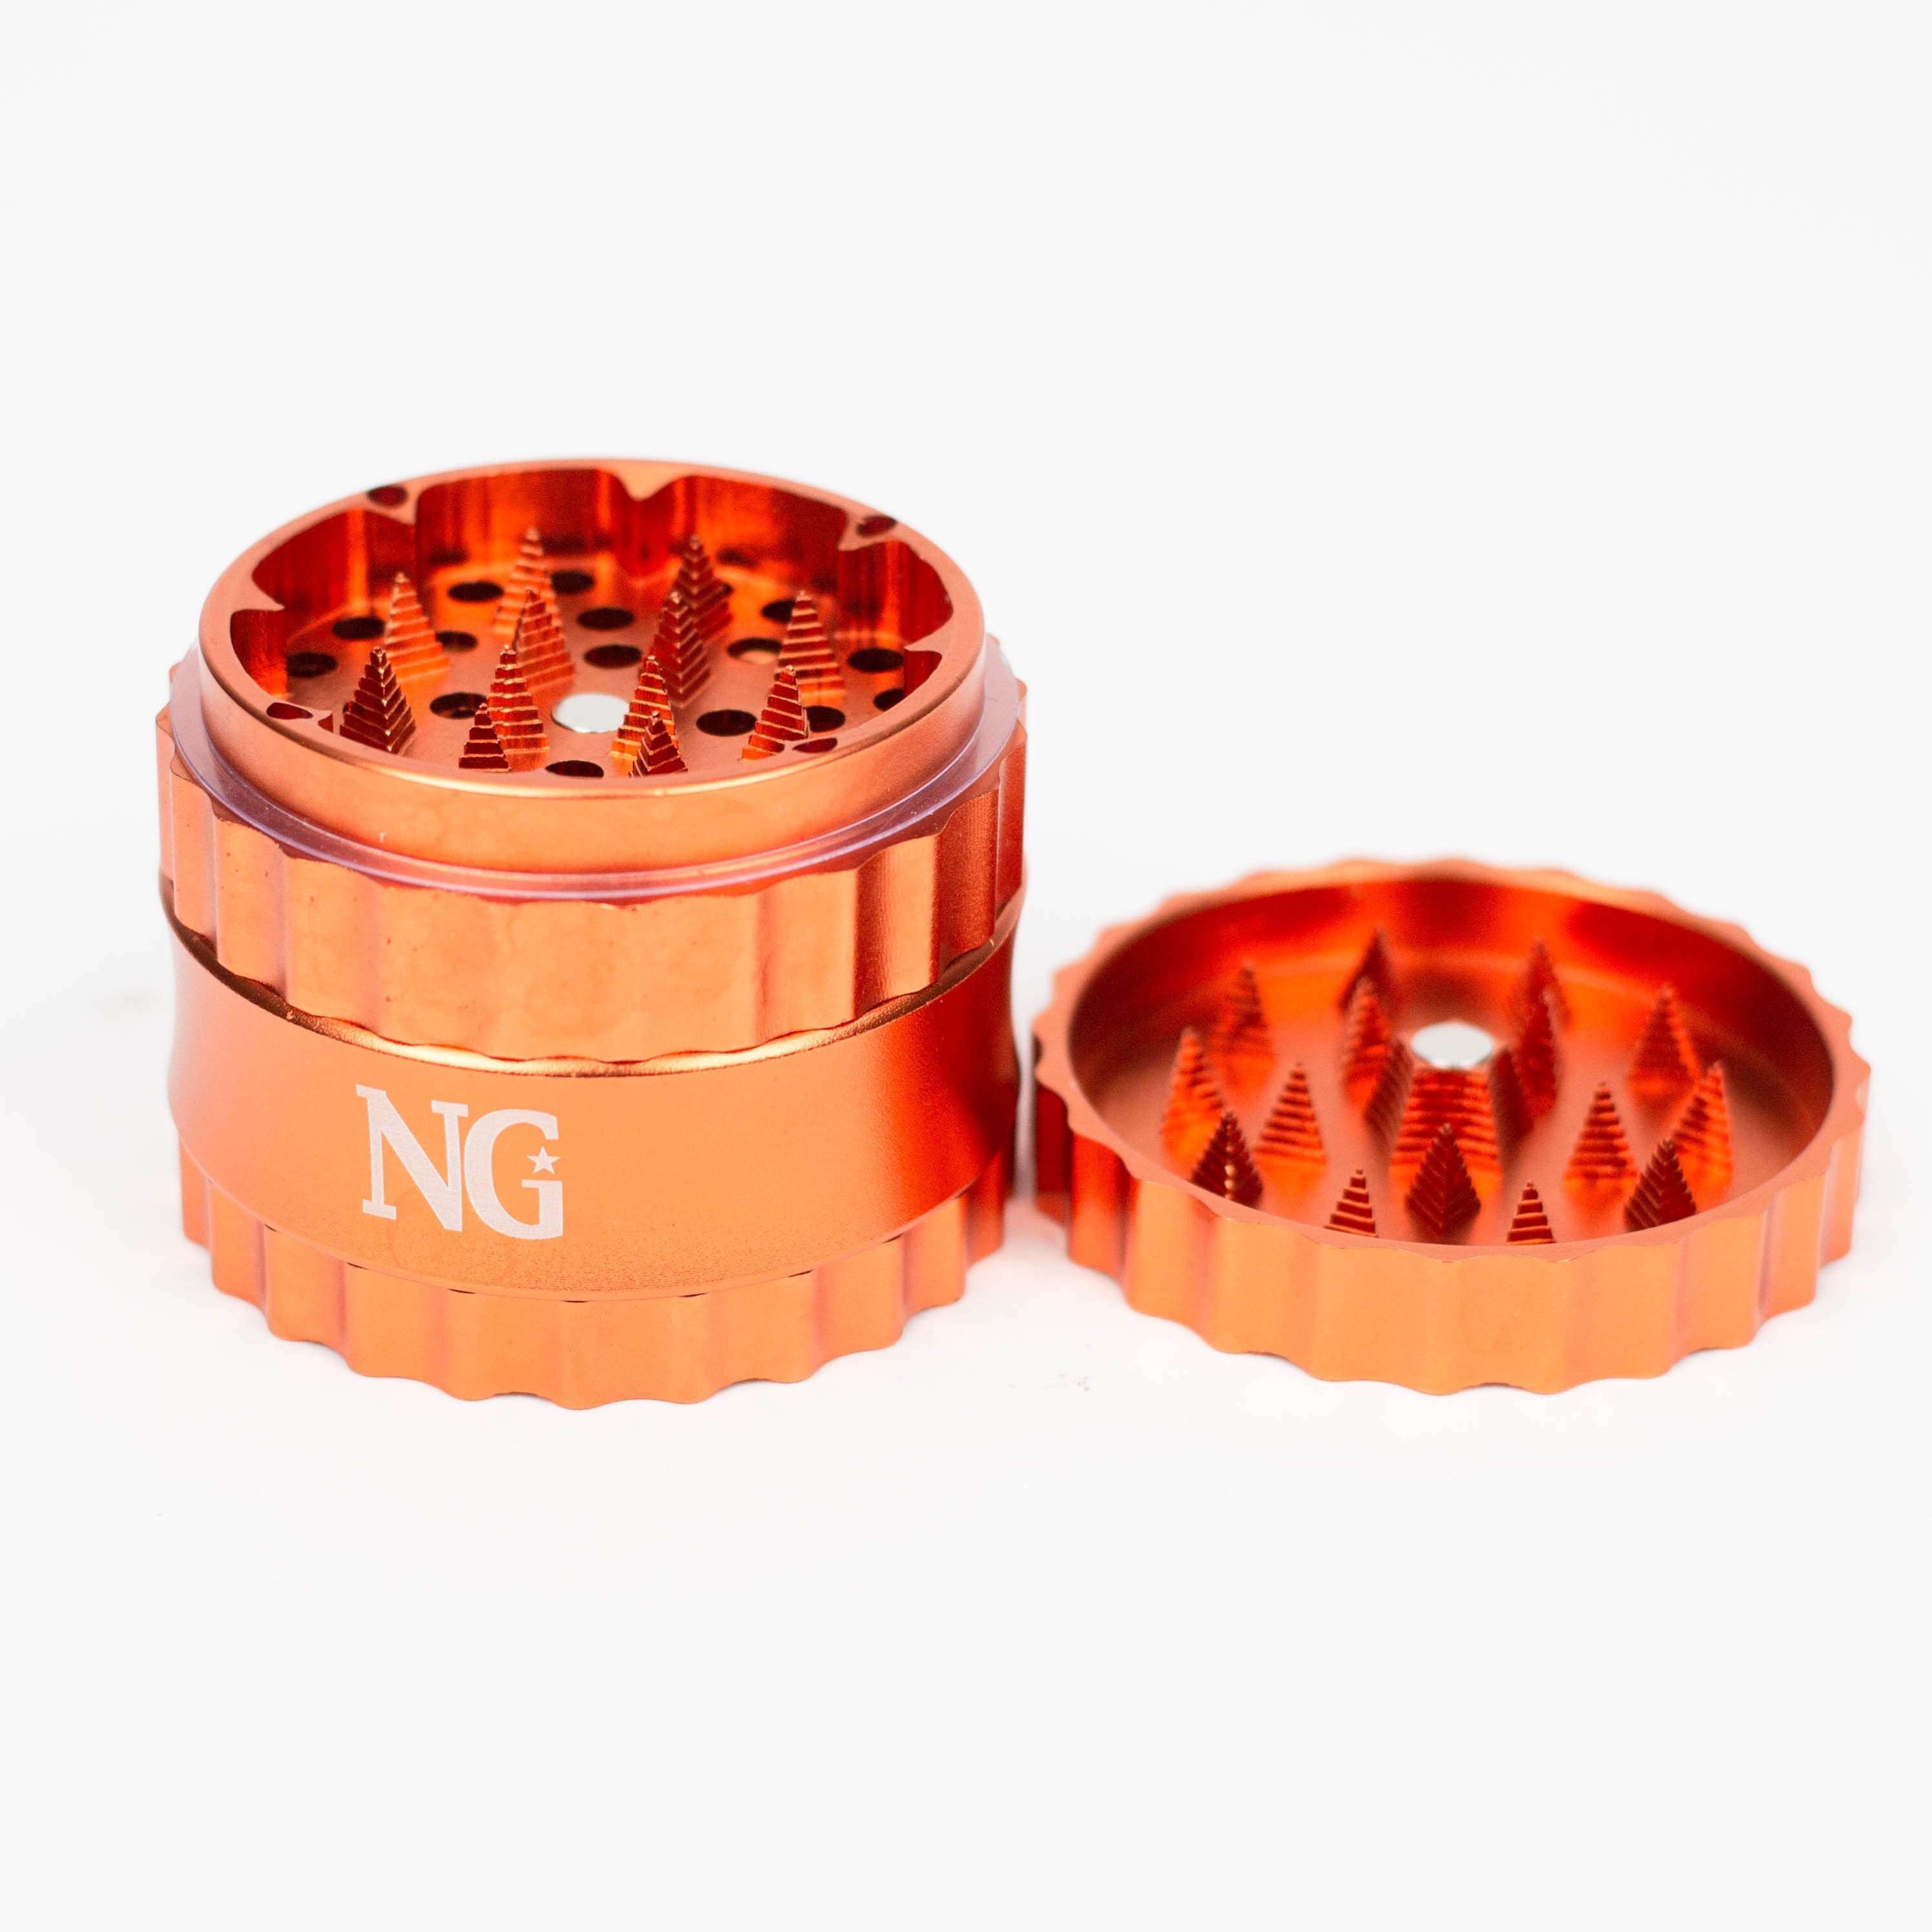 NG 4 Piece Chain & Gear Grinder_3